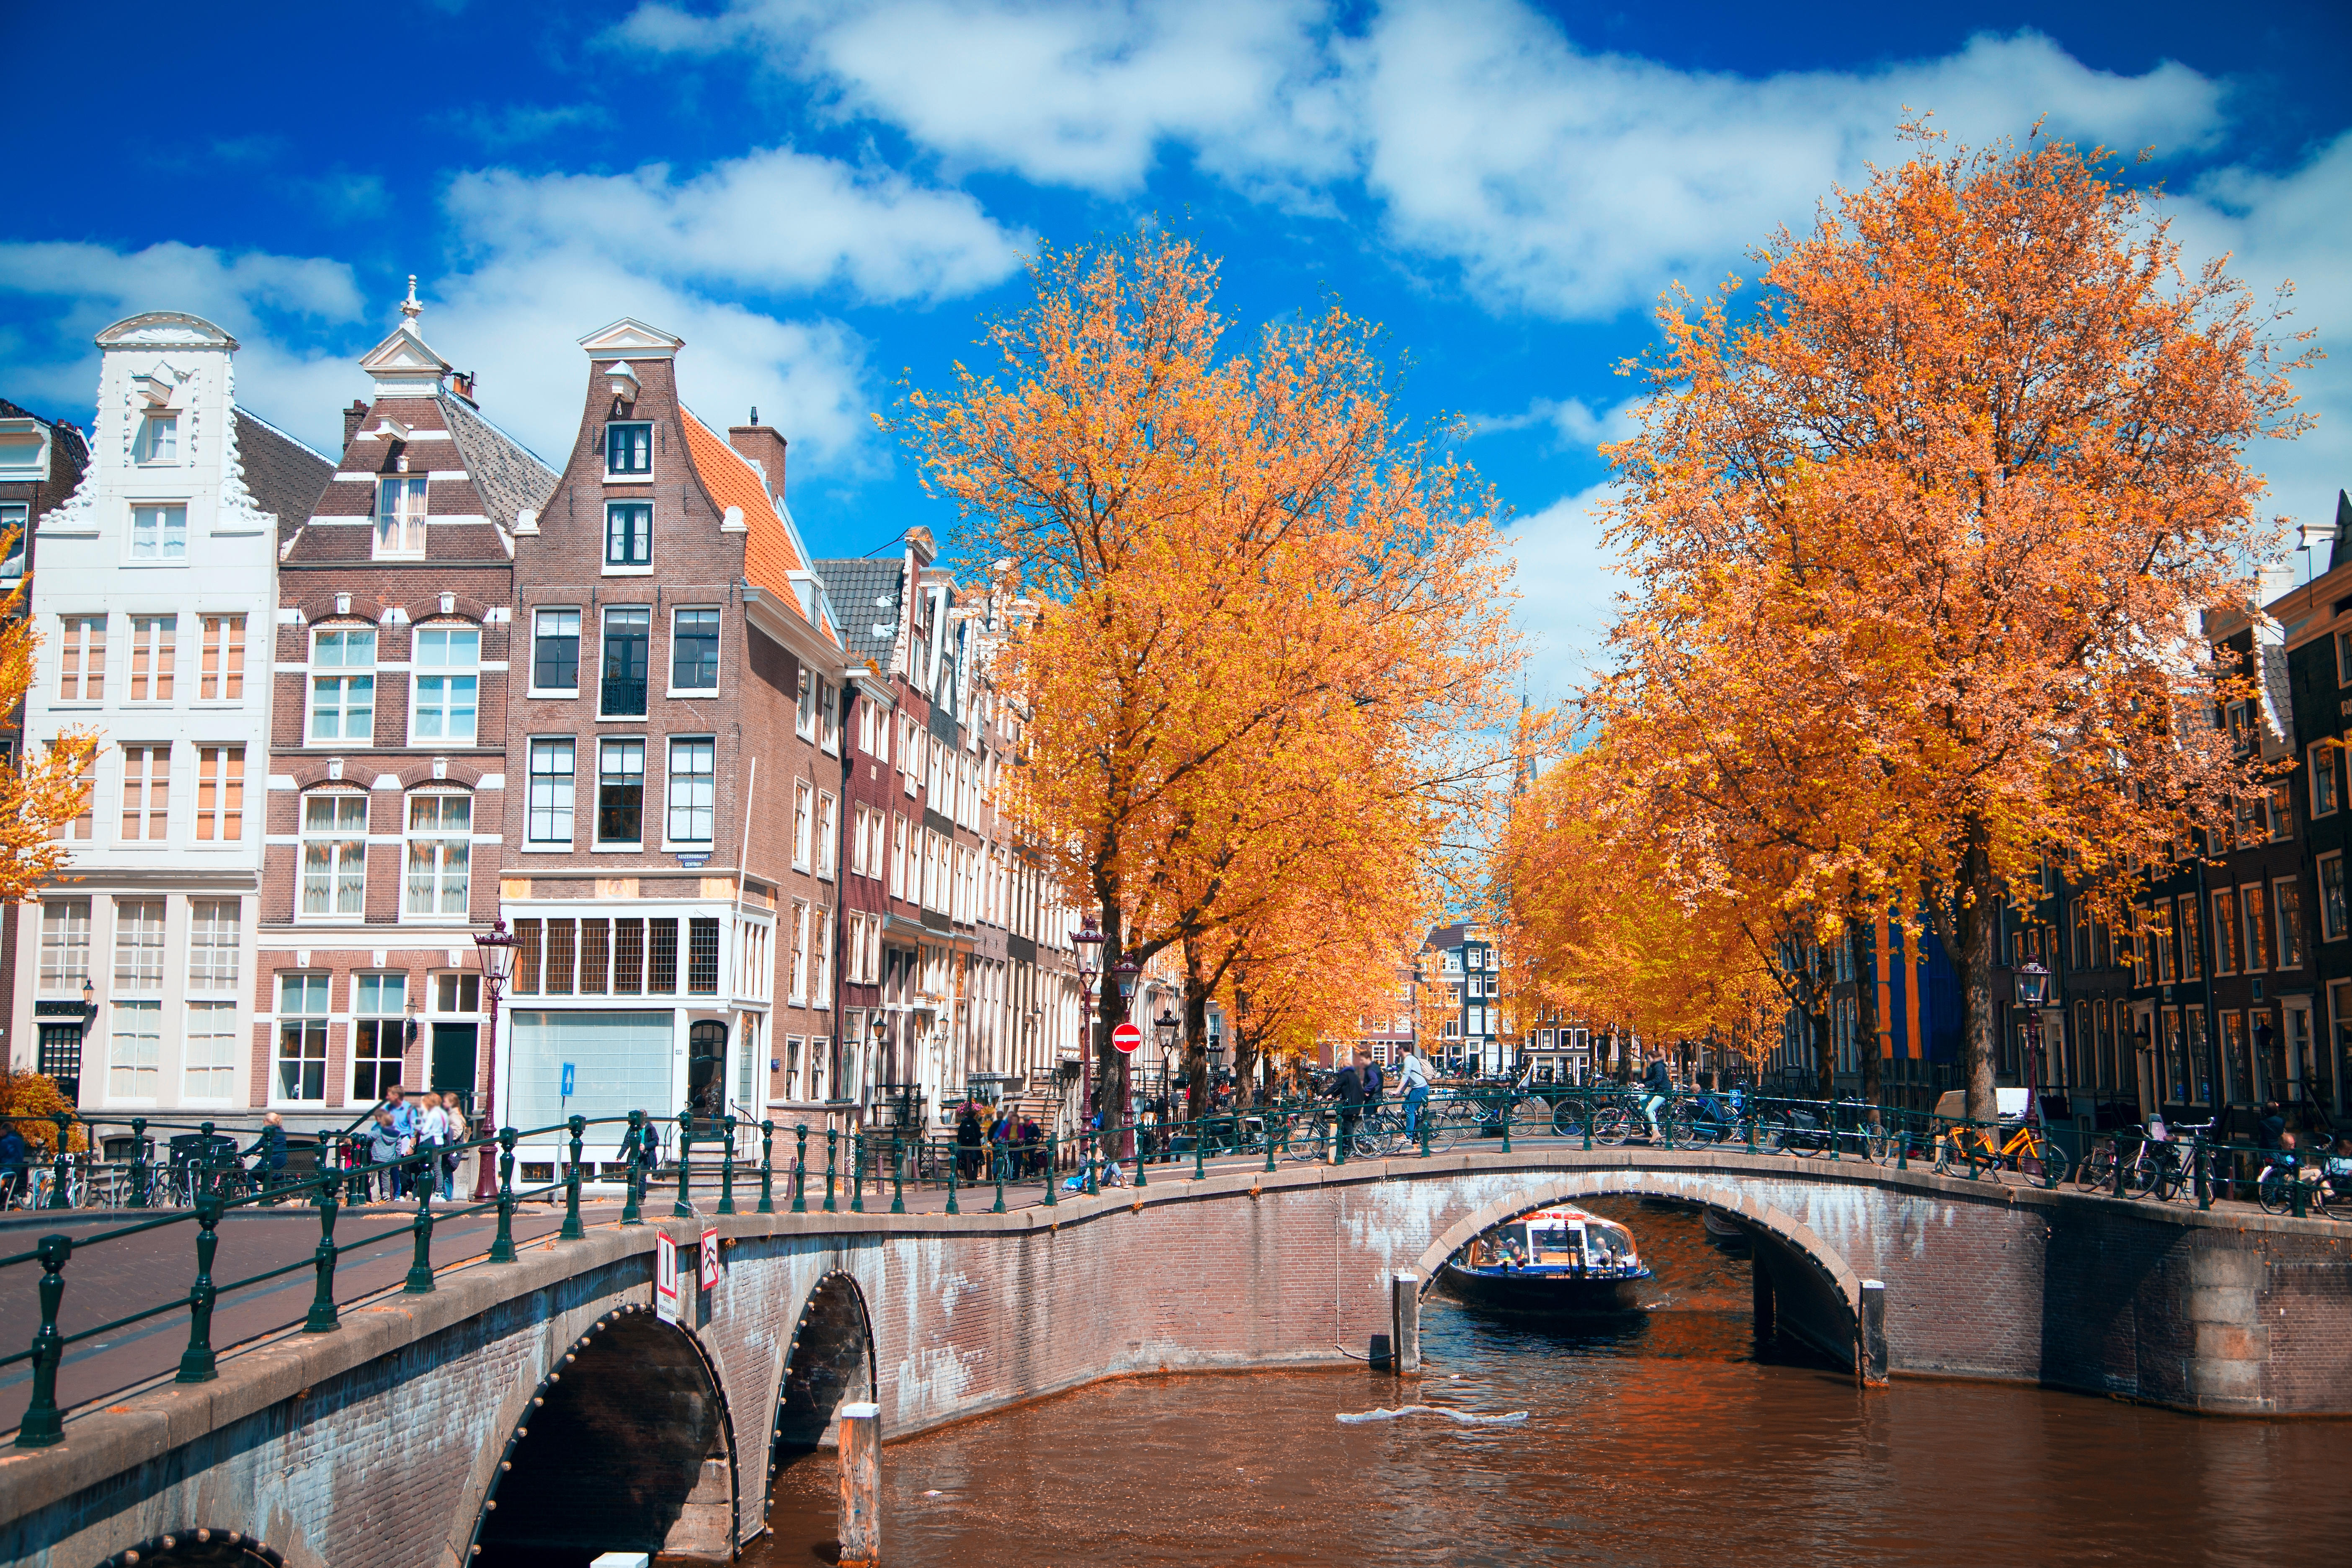 Wander Amsterdam's vibrant canals